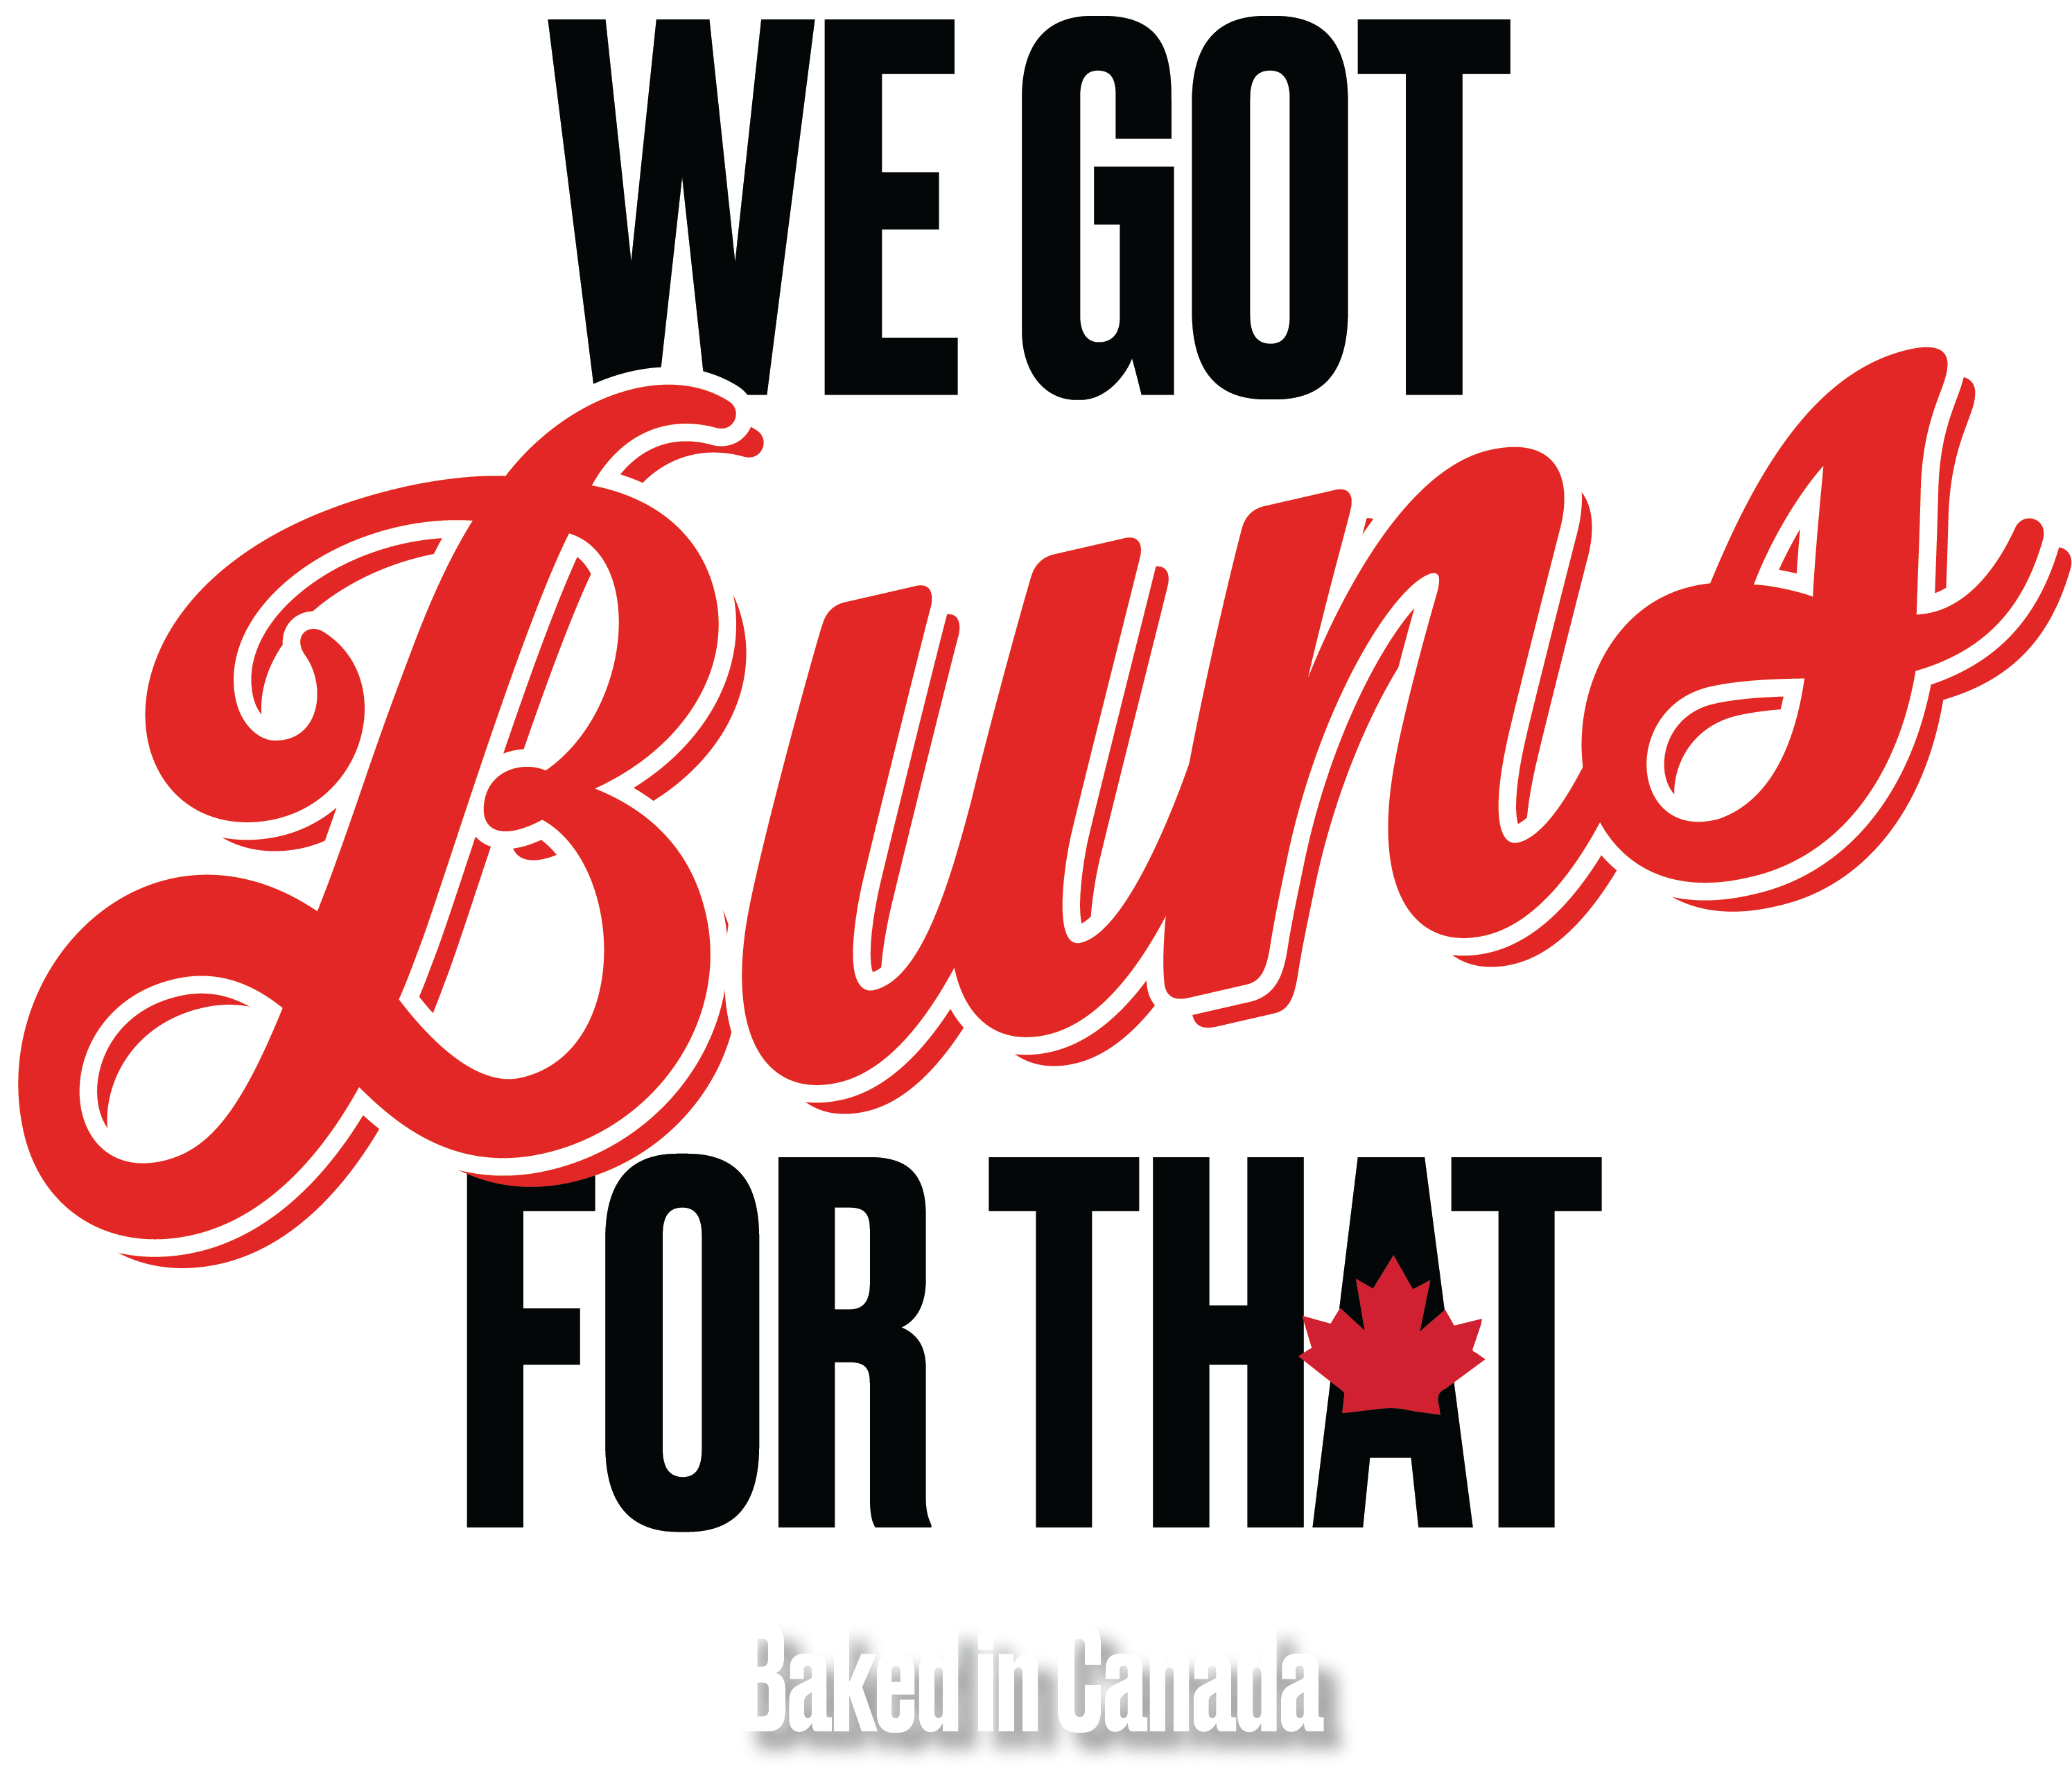 baked in Canada